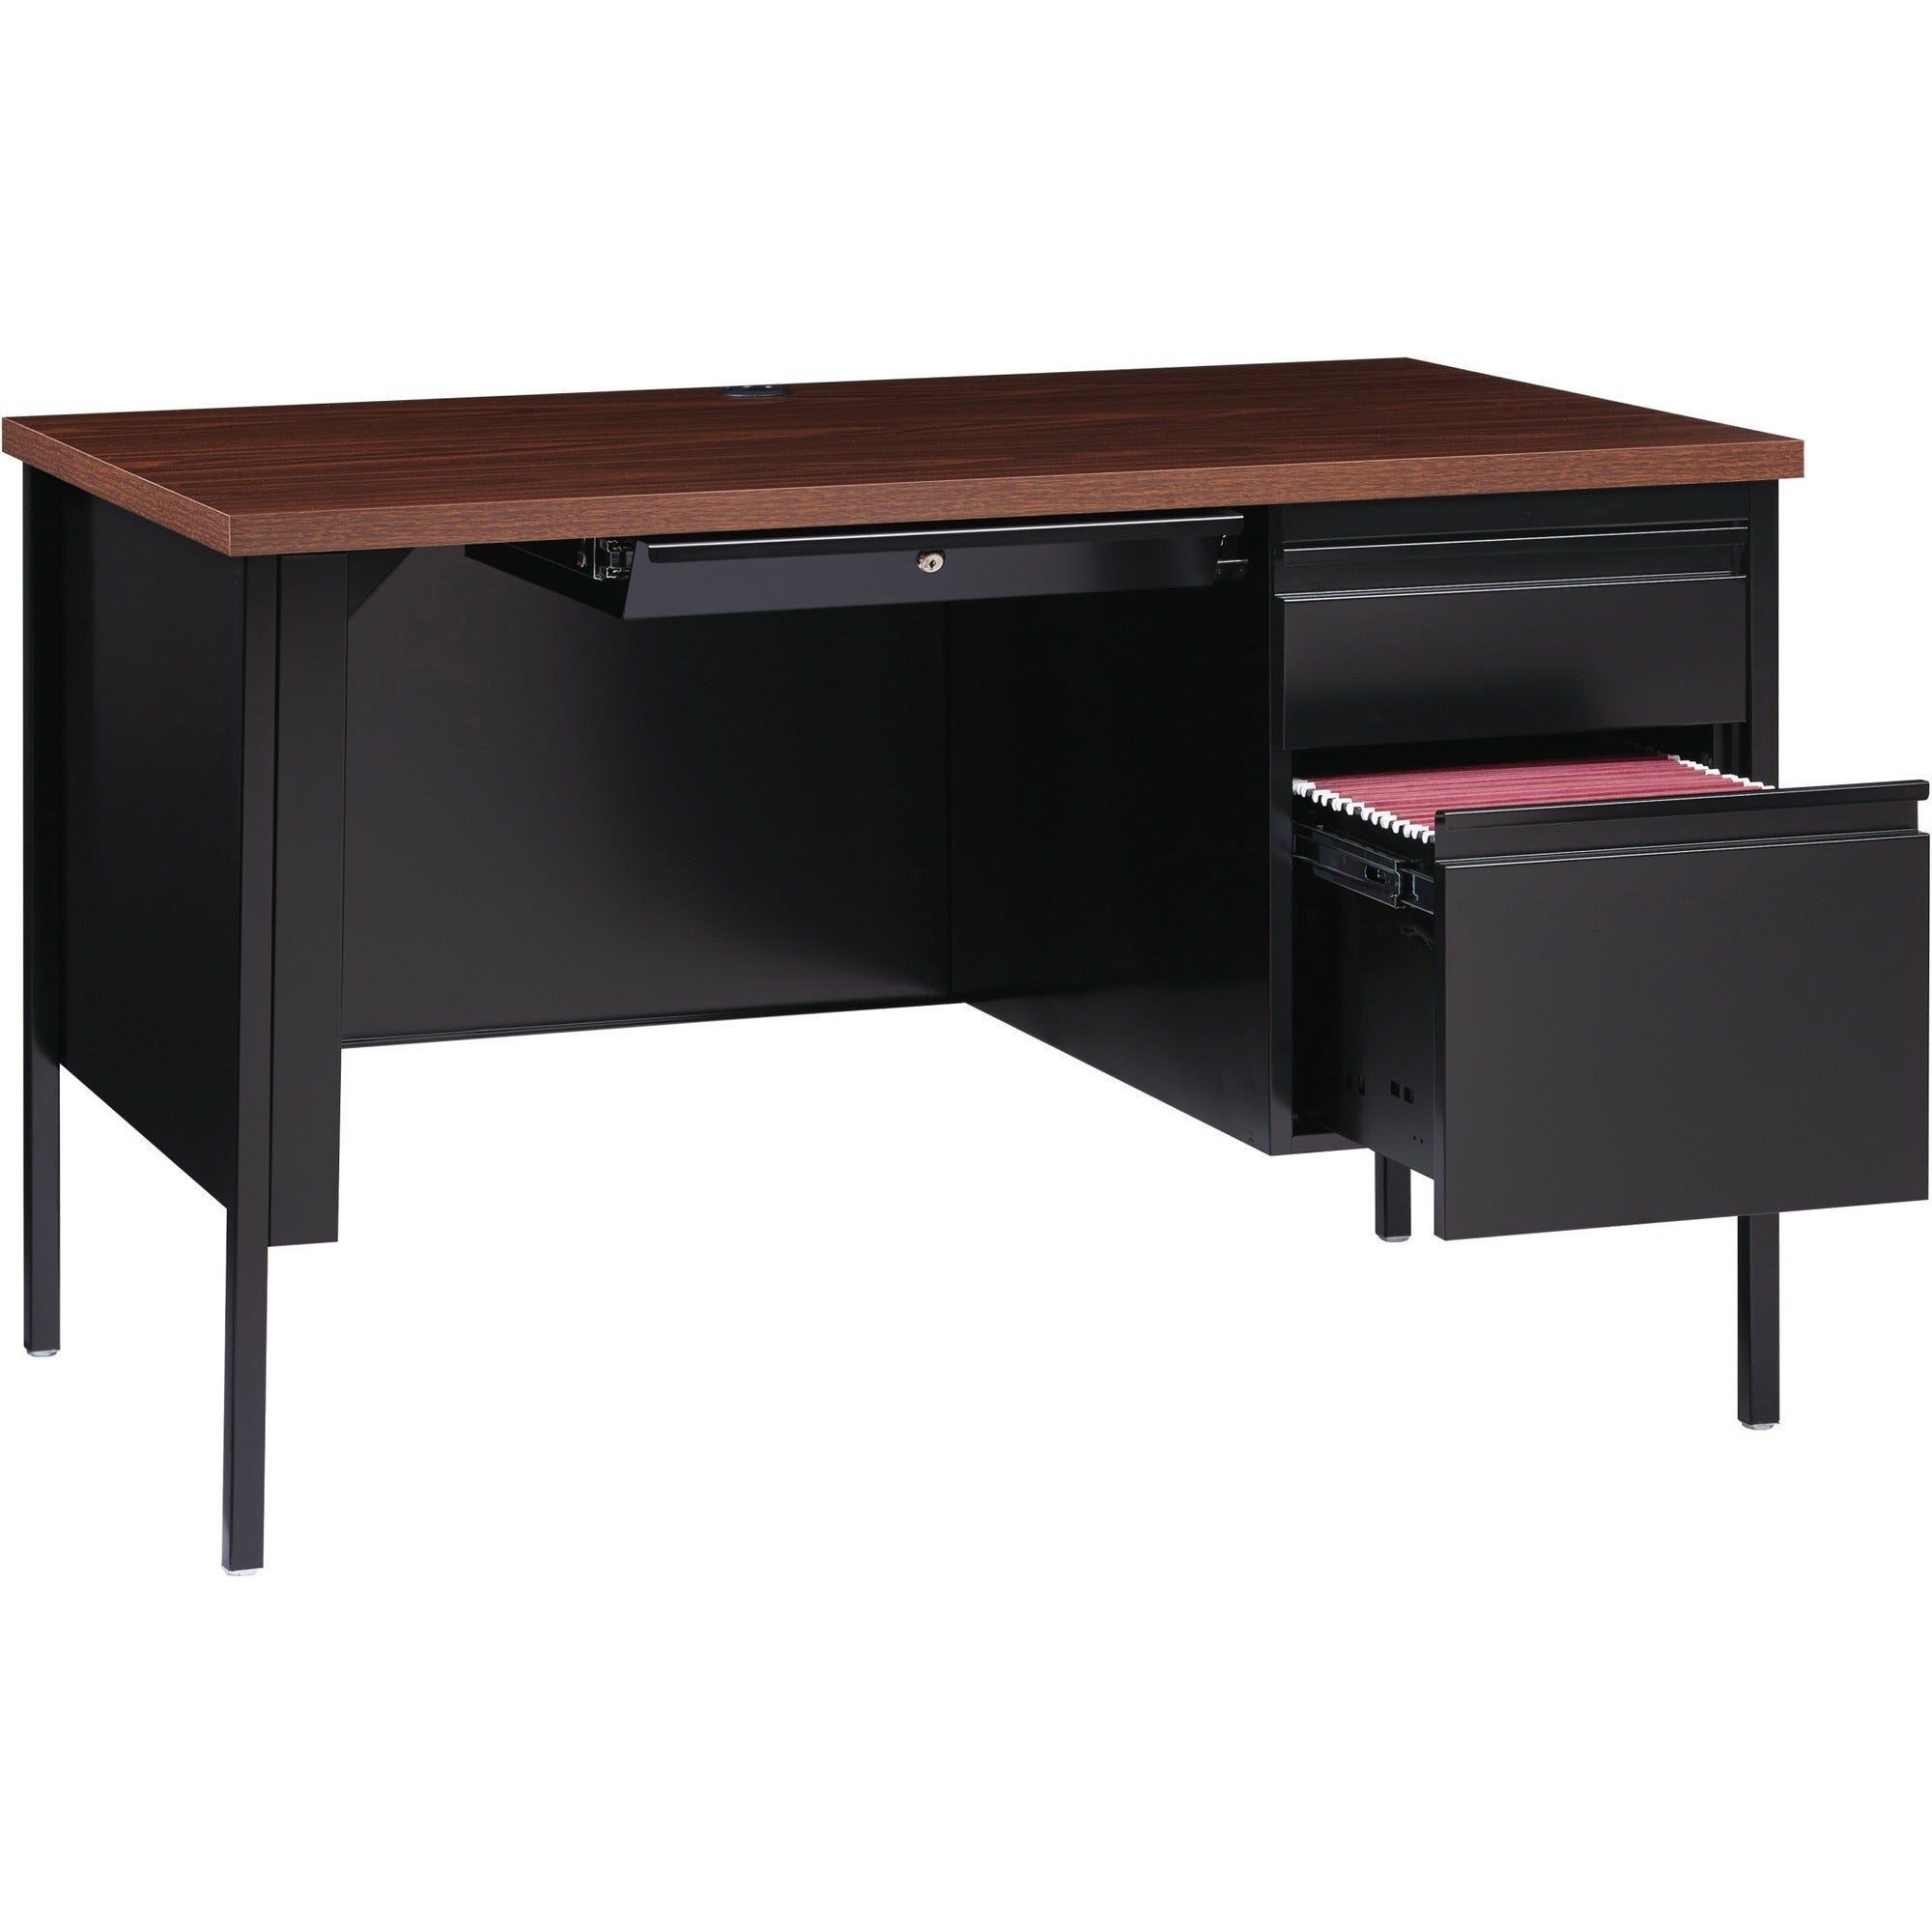 lorell-fortress-series-48-right-single-pedestal-desk-for-table-toplaminated-rectangle-walnut-top-30-table-top-length-x-48-table-top-width-x-113-table-top-thickness-2950-height-assembly-required-black-walnut-steel-1-each_llr66902 - 5